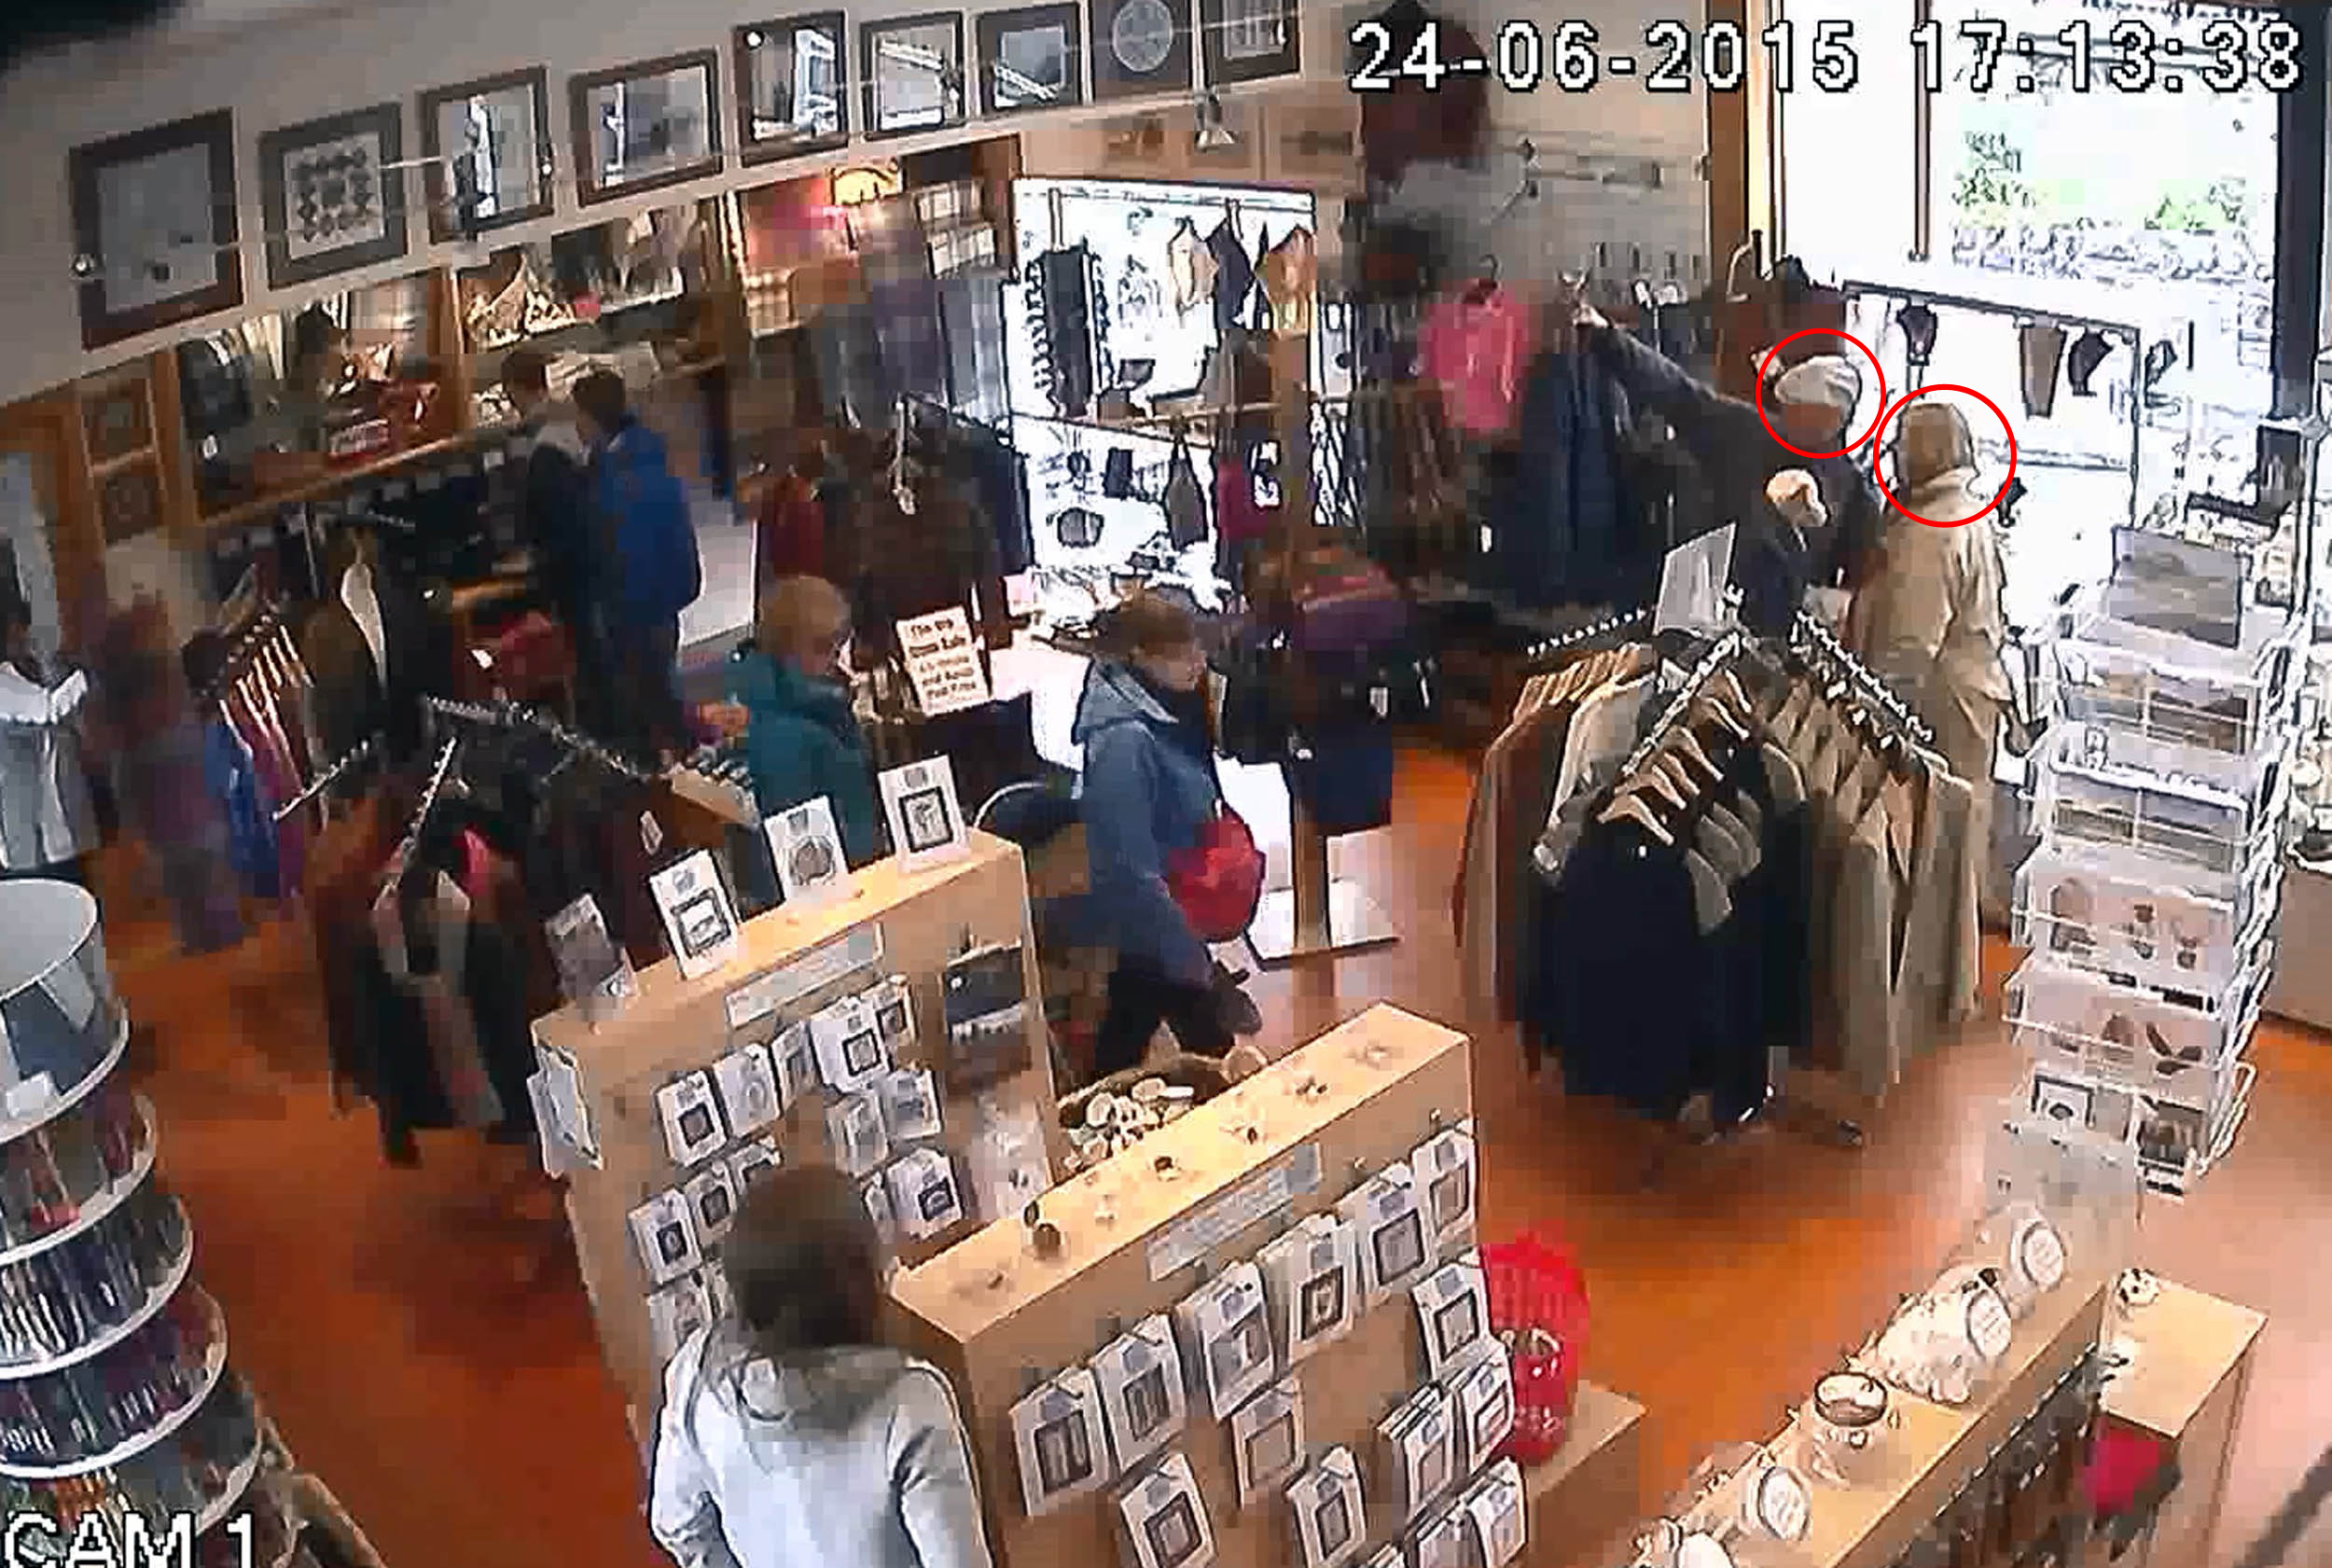 The French couple were filmed on the shop's CCTV  